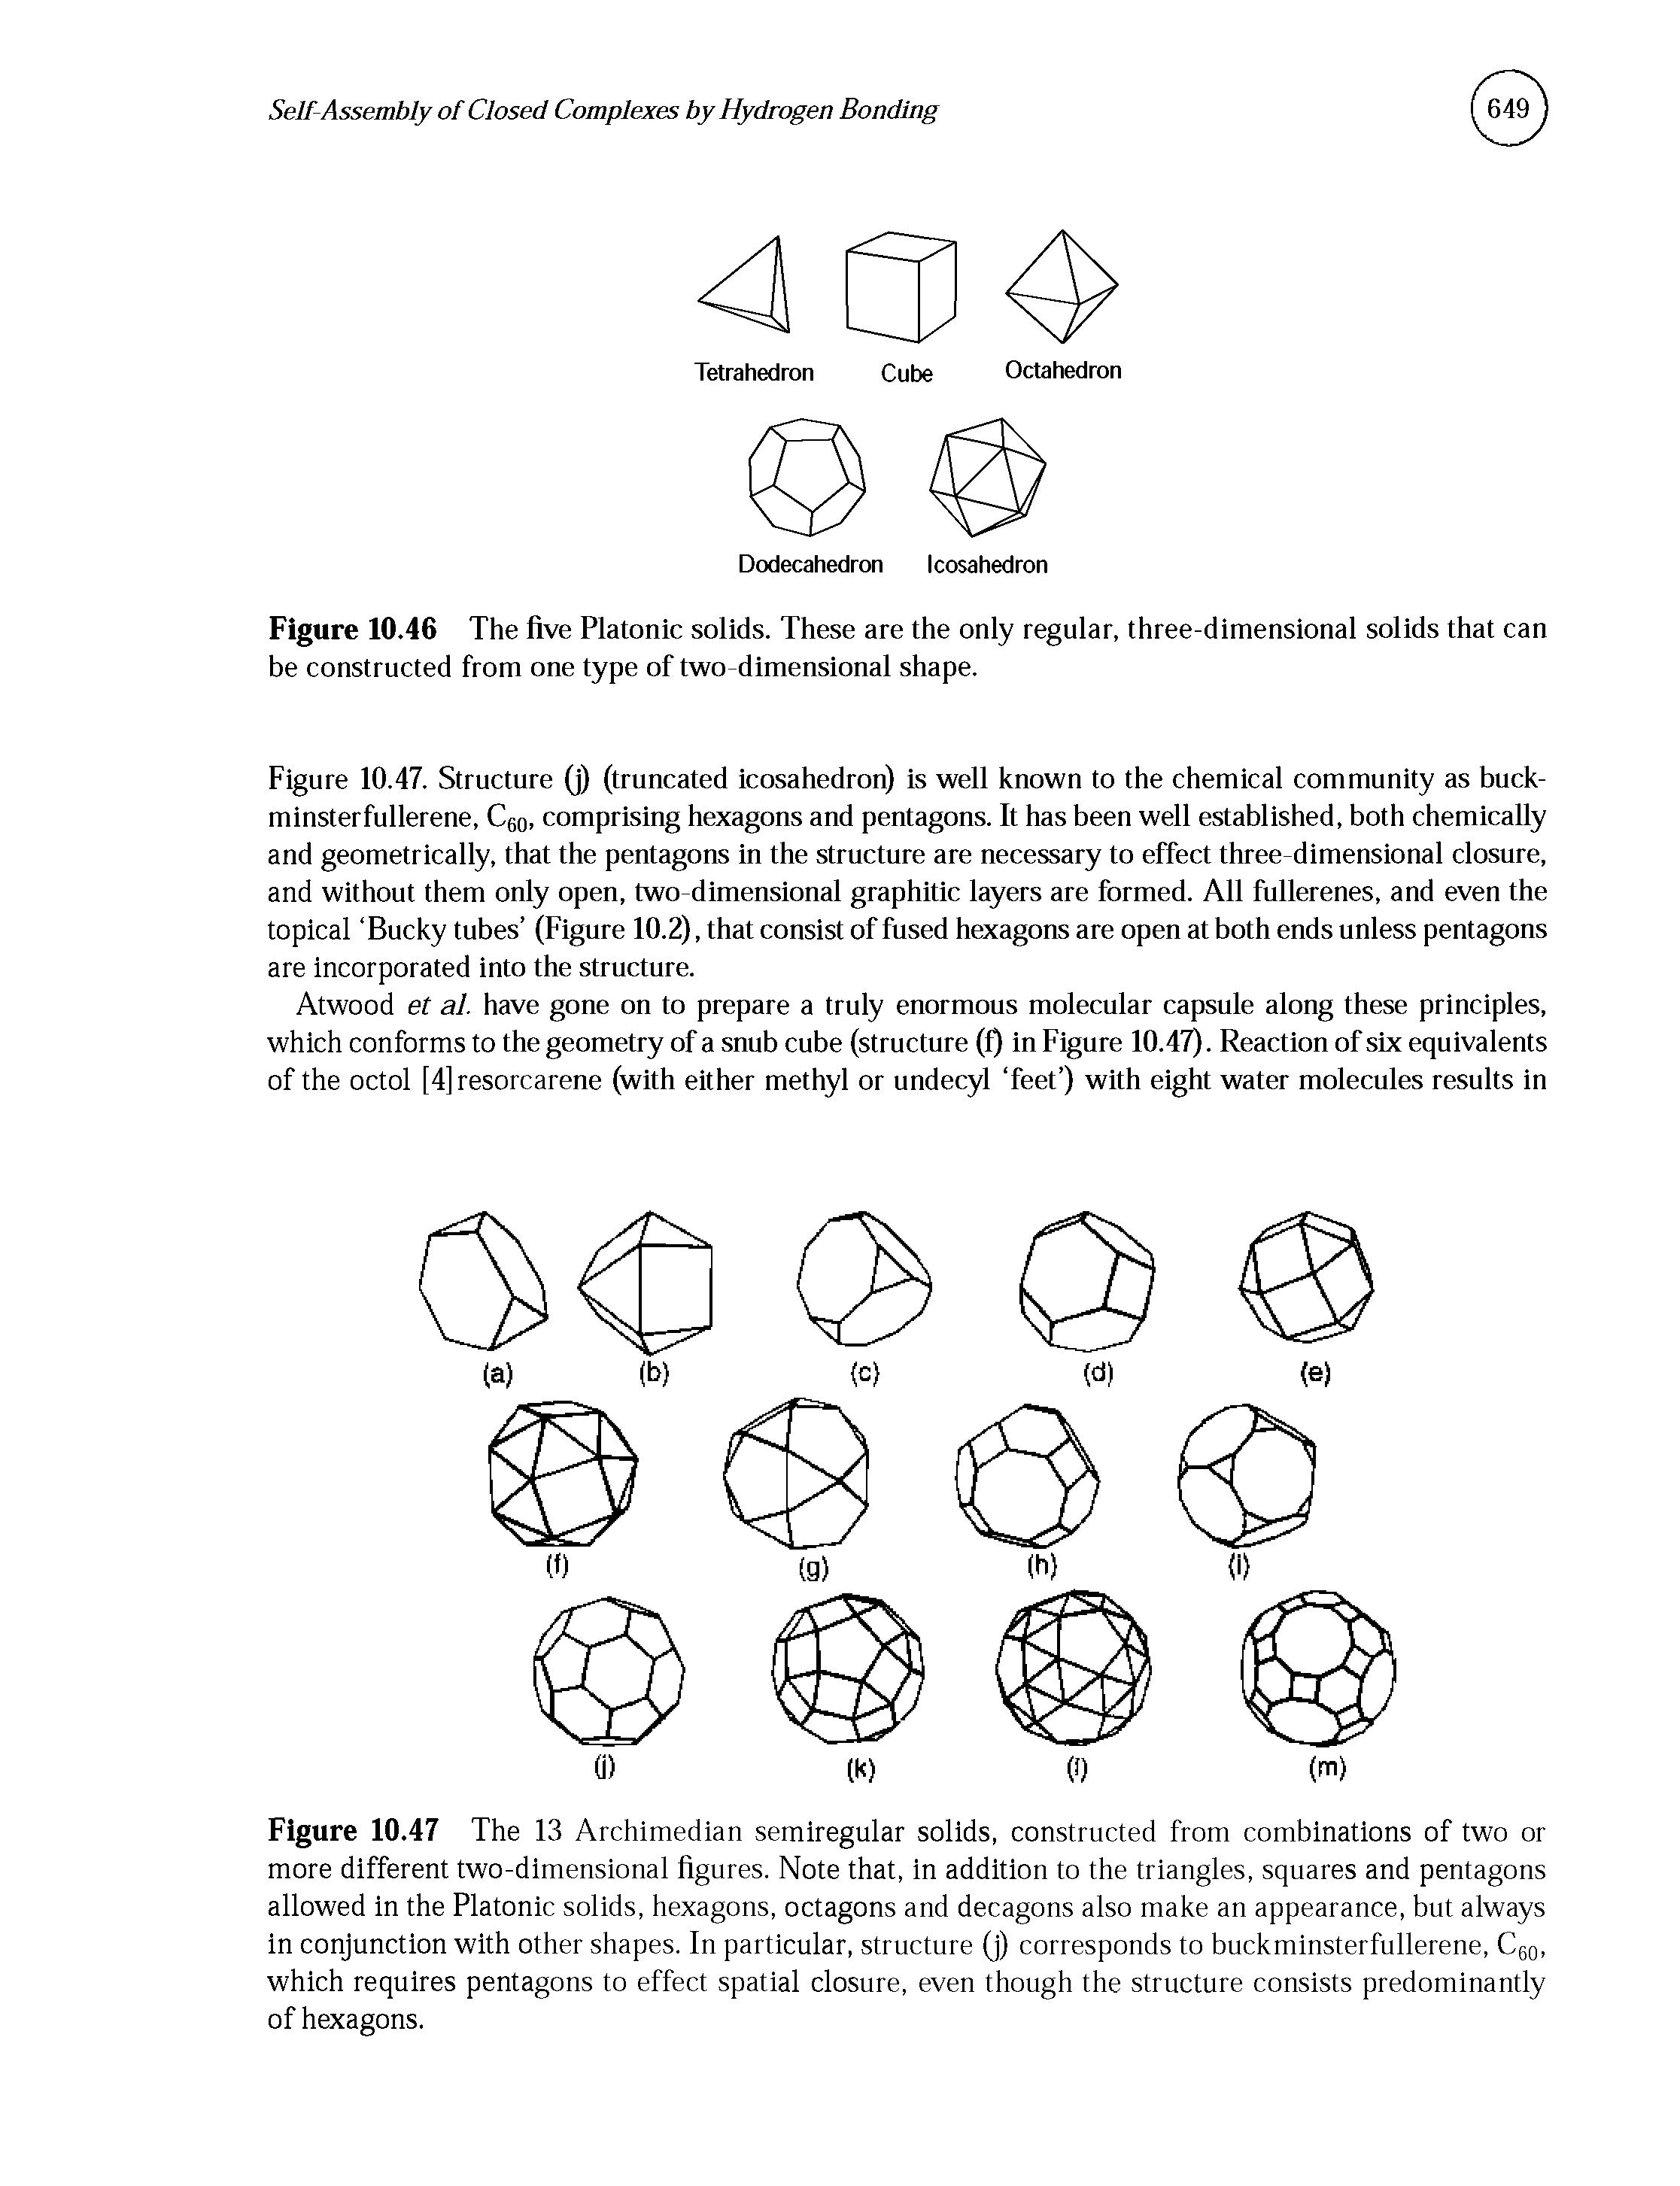 Figure 10.46 The five Platonic solids. These are the only regular, three-dimensional solids that can be constructed from one type of two-dimensional shape.